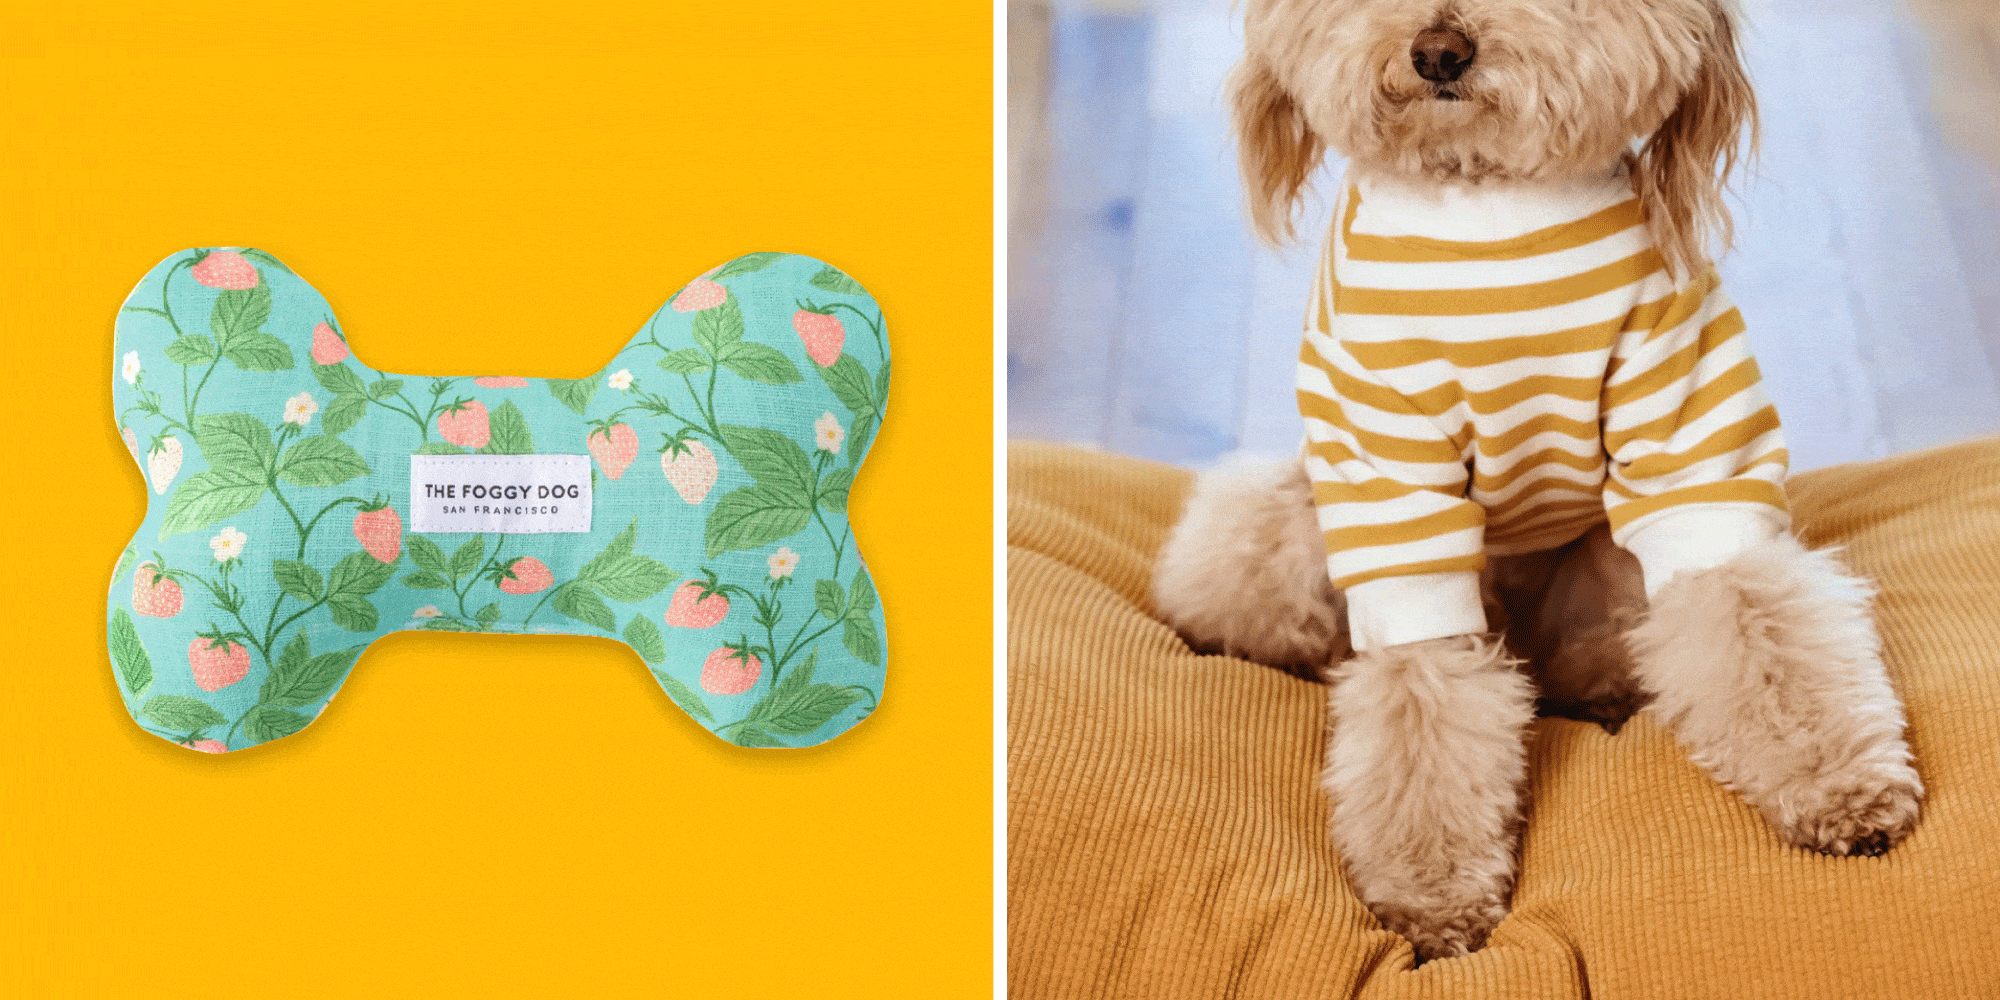 Shop the best dog gifts and gift ideas for dogs, dog moms and dog dads